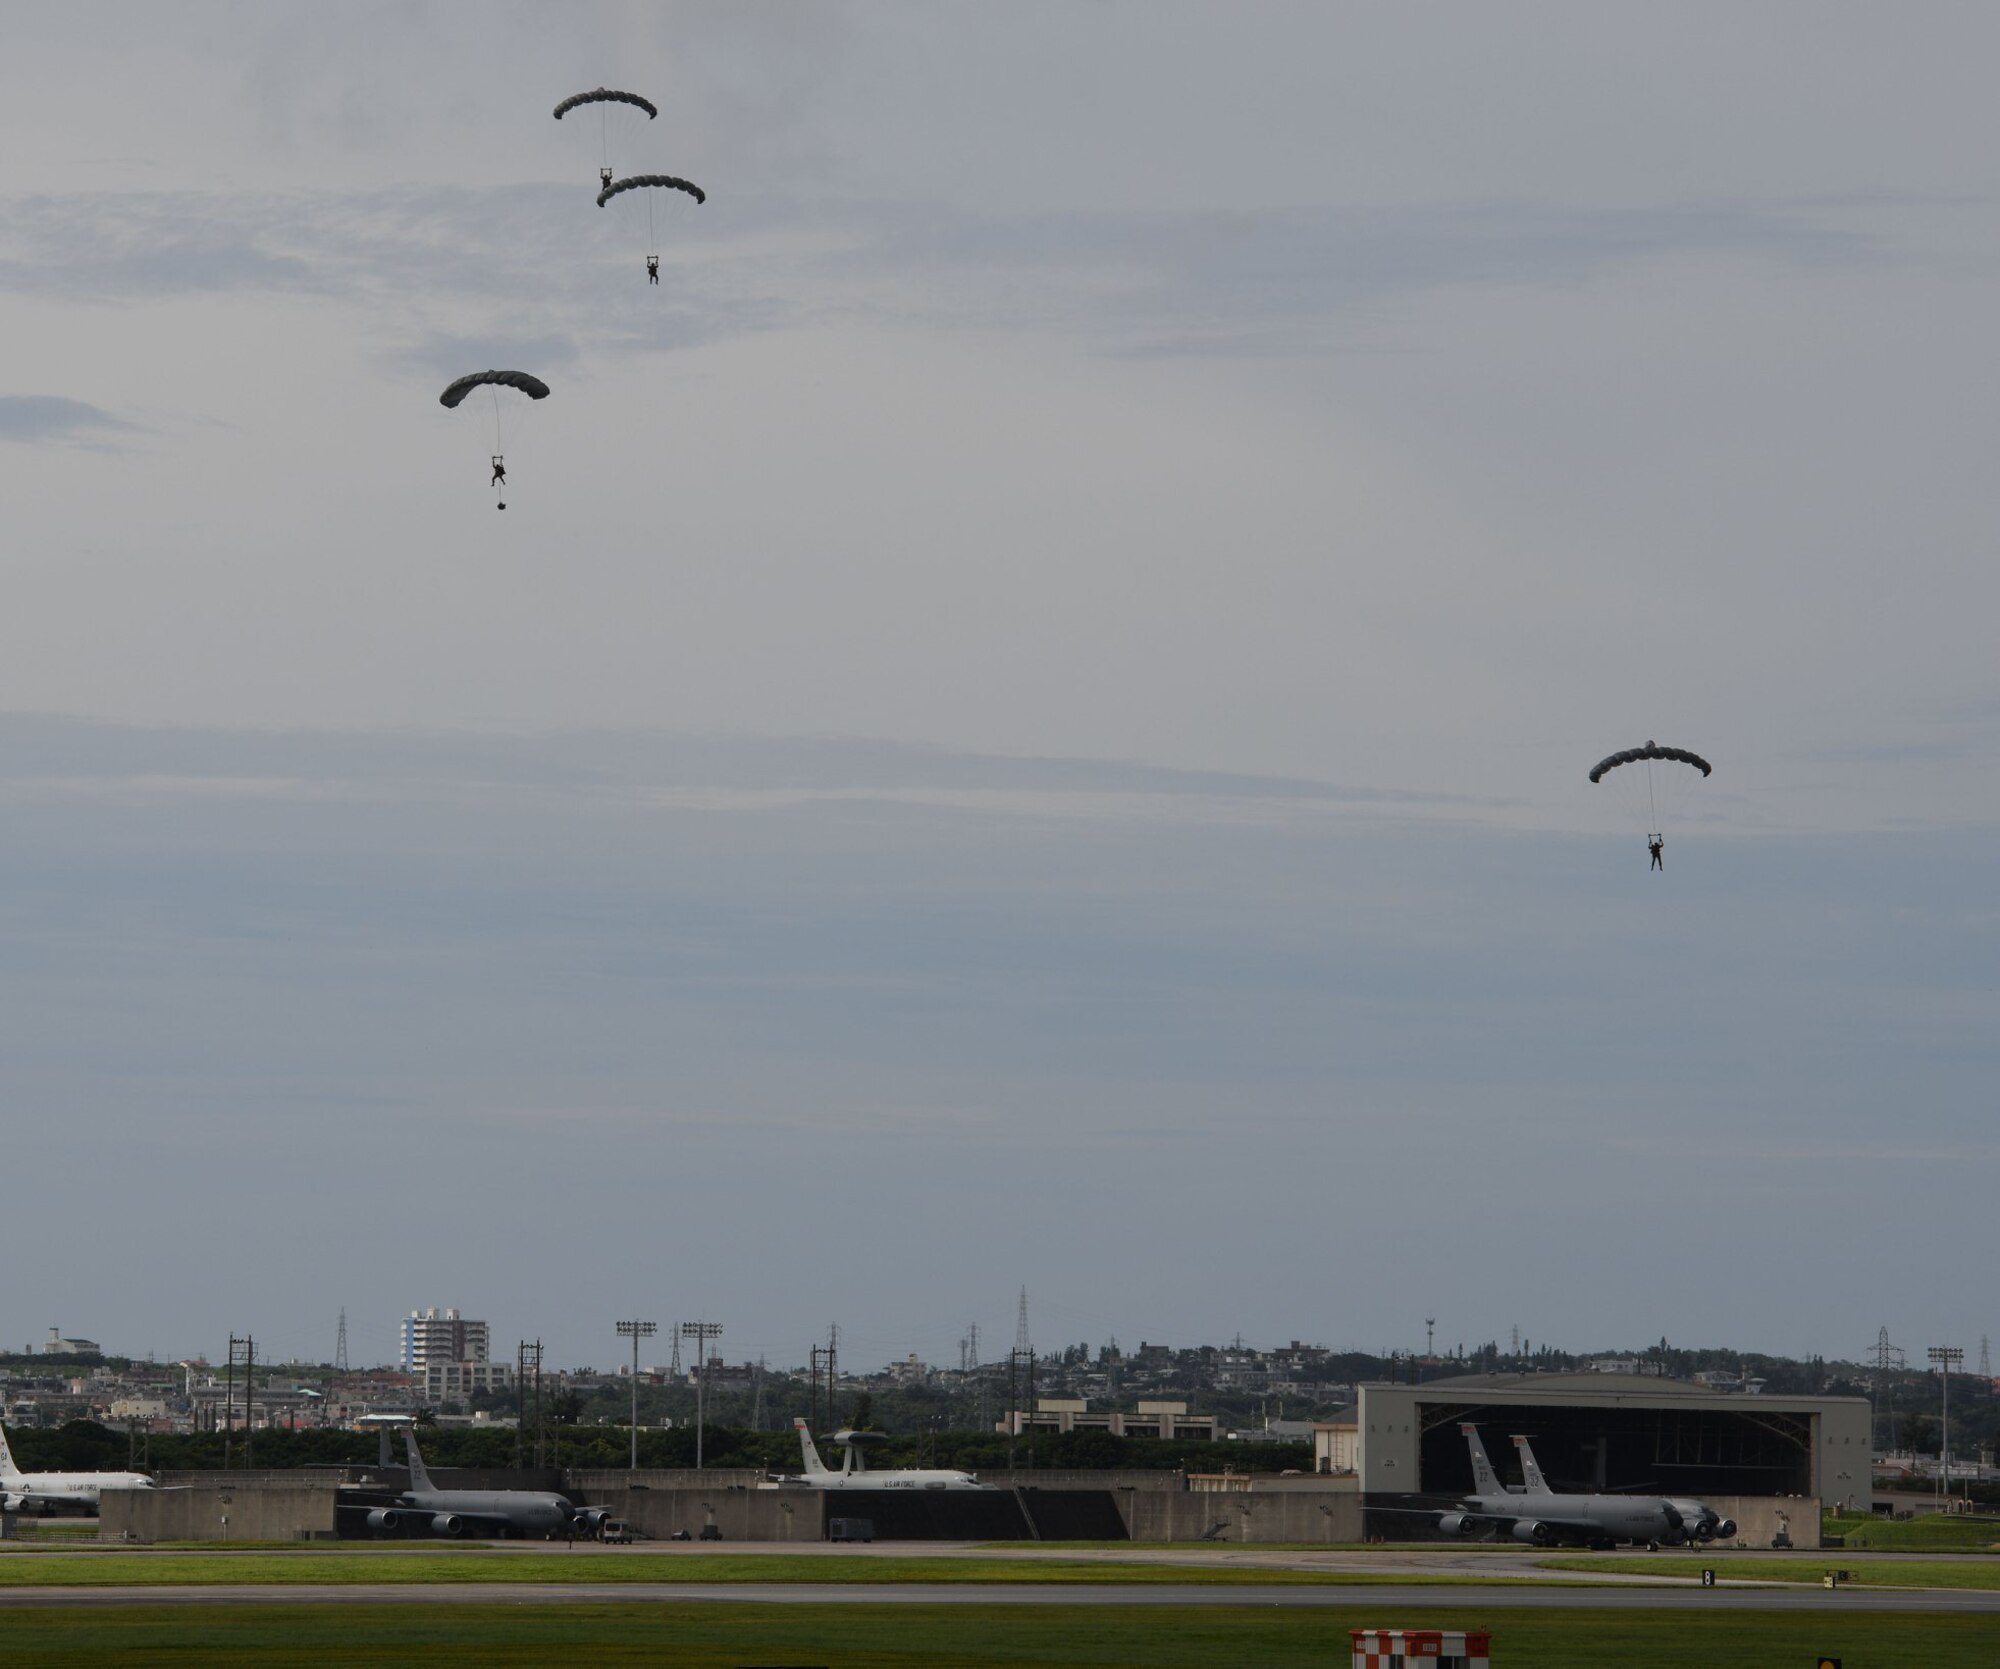 Air Force servicemembers conduct paradrop training at the Ridout drop zone July 9, 2020, on Kadena Air Base, Japan. All training on Kadena AB is conducted in accordance with bilateral agreements between the United States and the Government of Japan. Ie Jima is the primary location for overland U.S. military paradrop training in Okinawa. The bilateral agreements allow for the use of Kadena AB as an alternate location when Ie Jima is not available to meet the immediate training needs of U.S. forces.